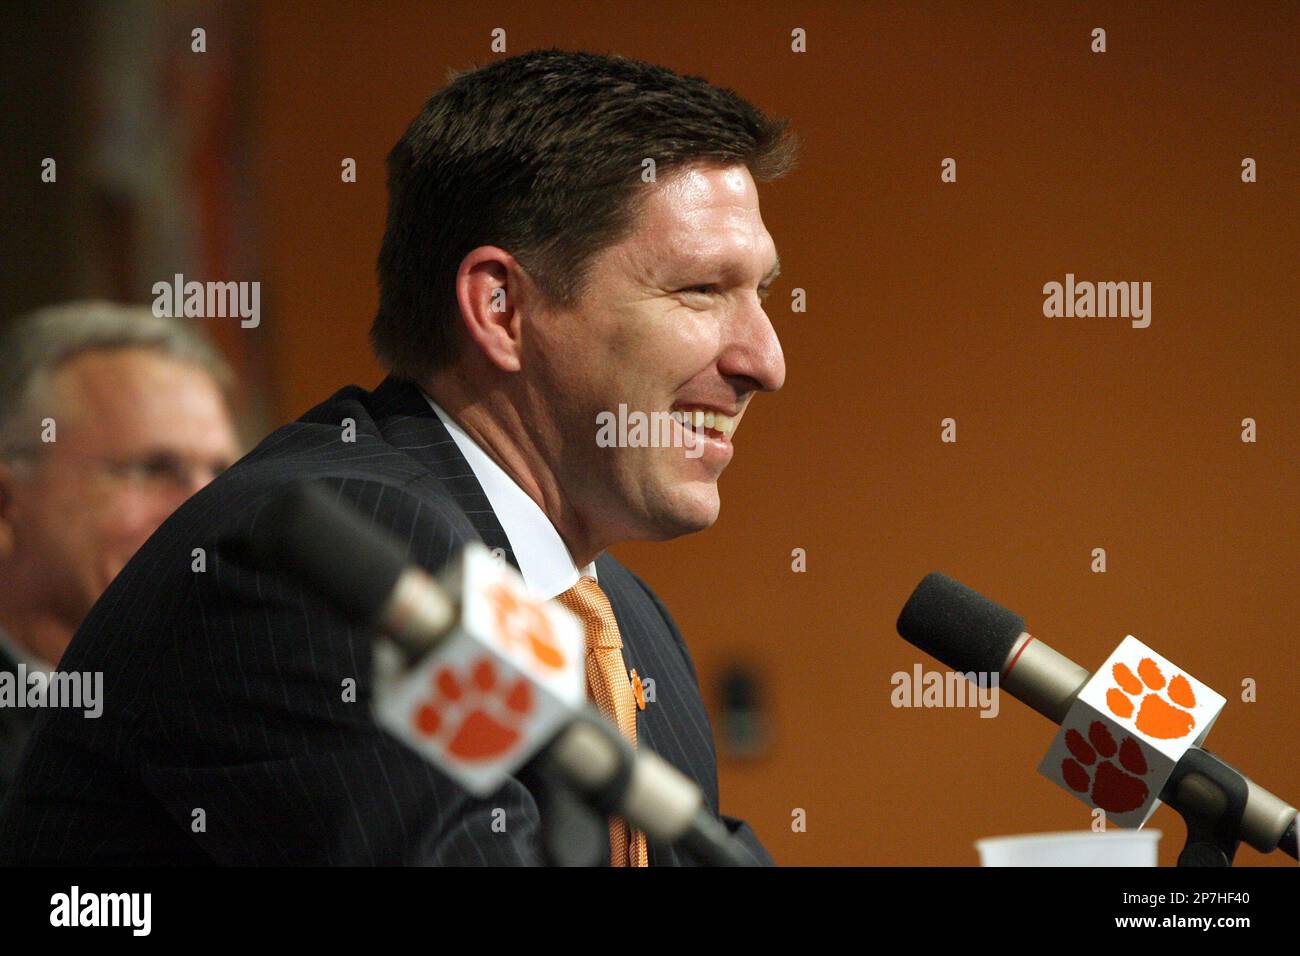 Brad Brownell smiles after being introduced as Clemson's new head men's  basketball coach at a press conference in Clemson, . on Tuesday, April  13, 2010. Brownell left Wright State, where he had